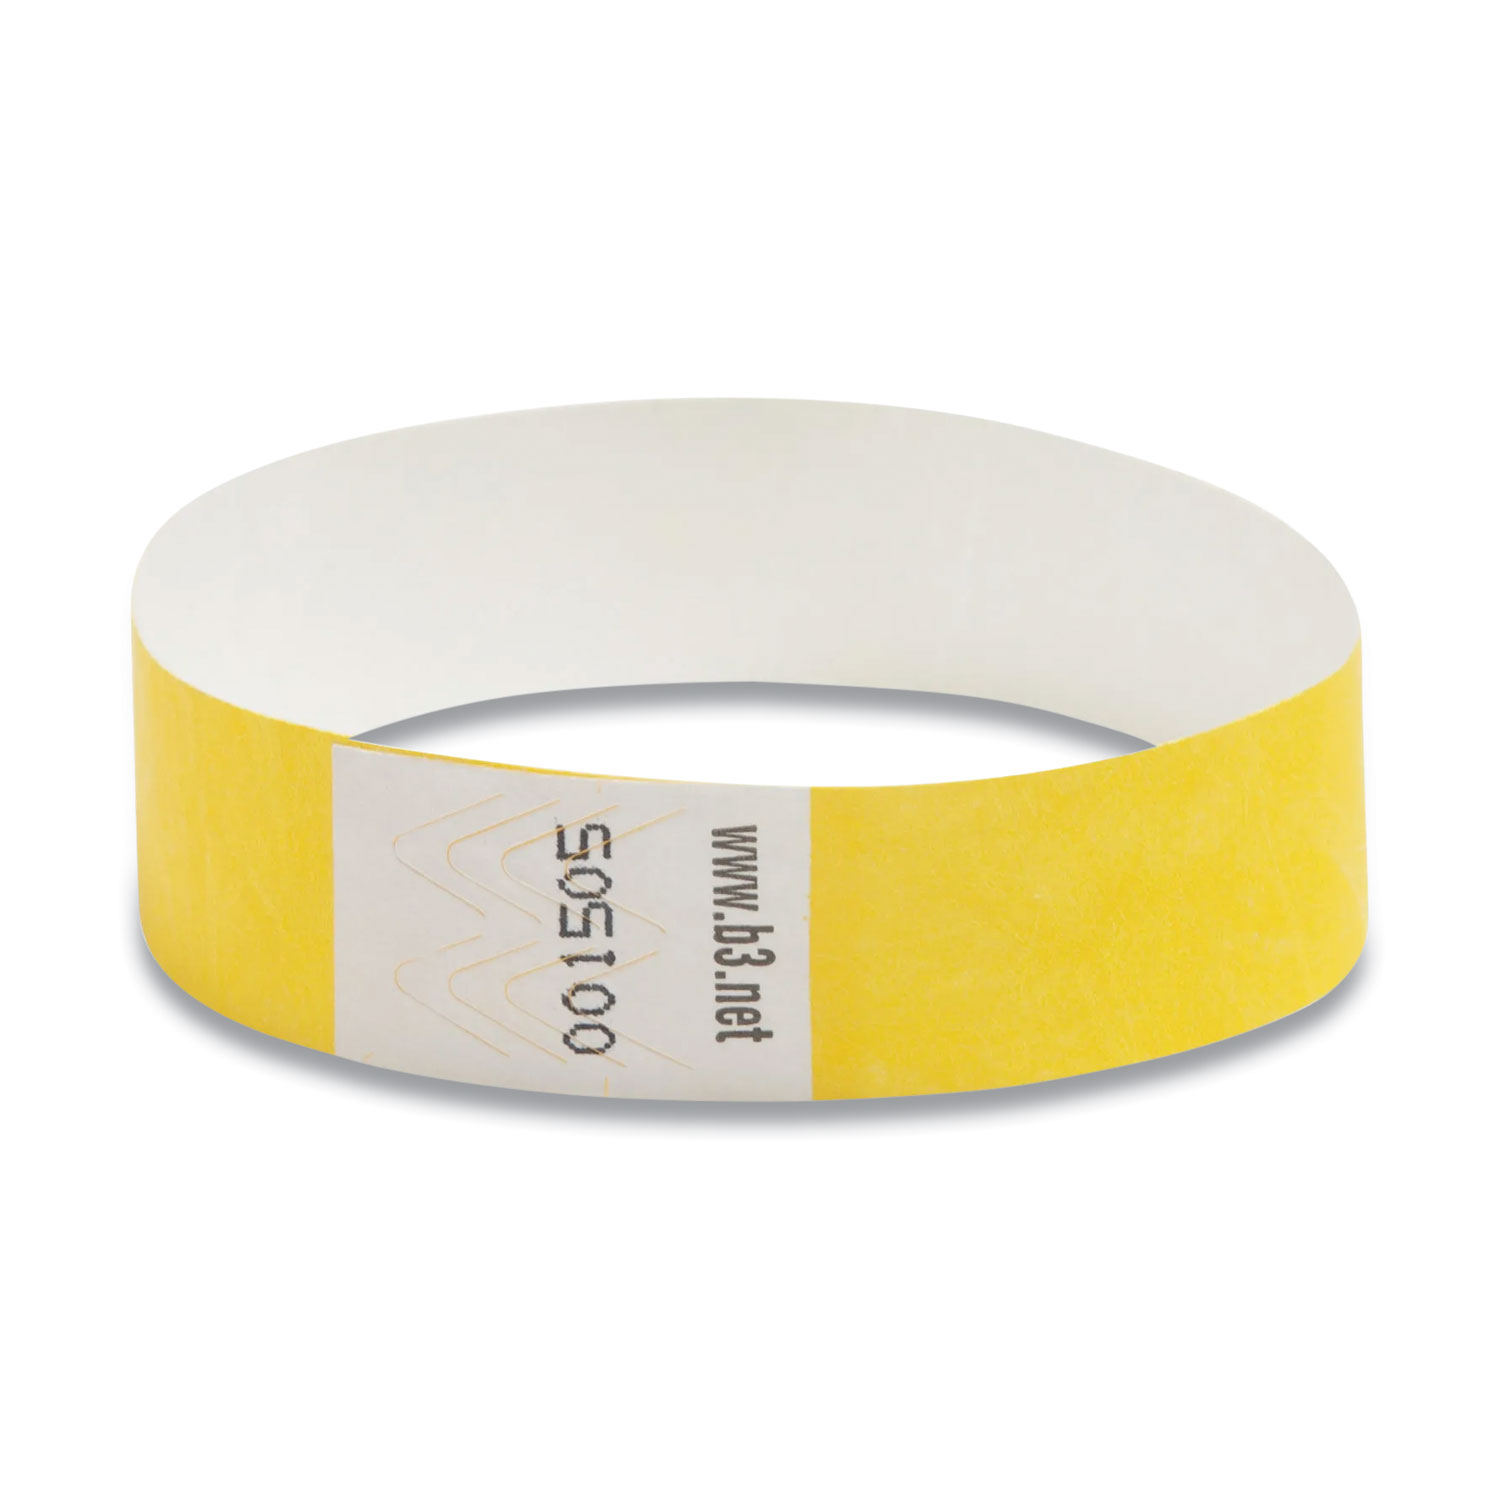 Paper Security Wristband